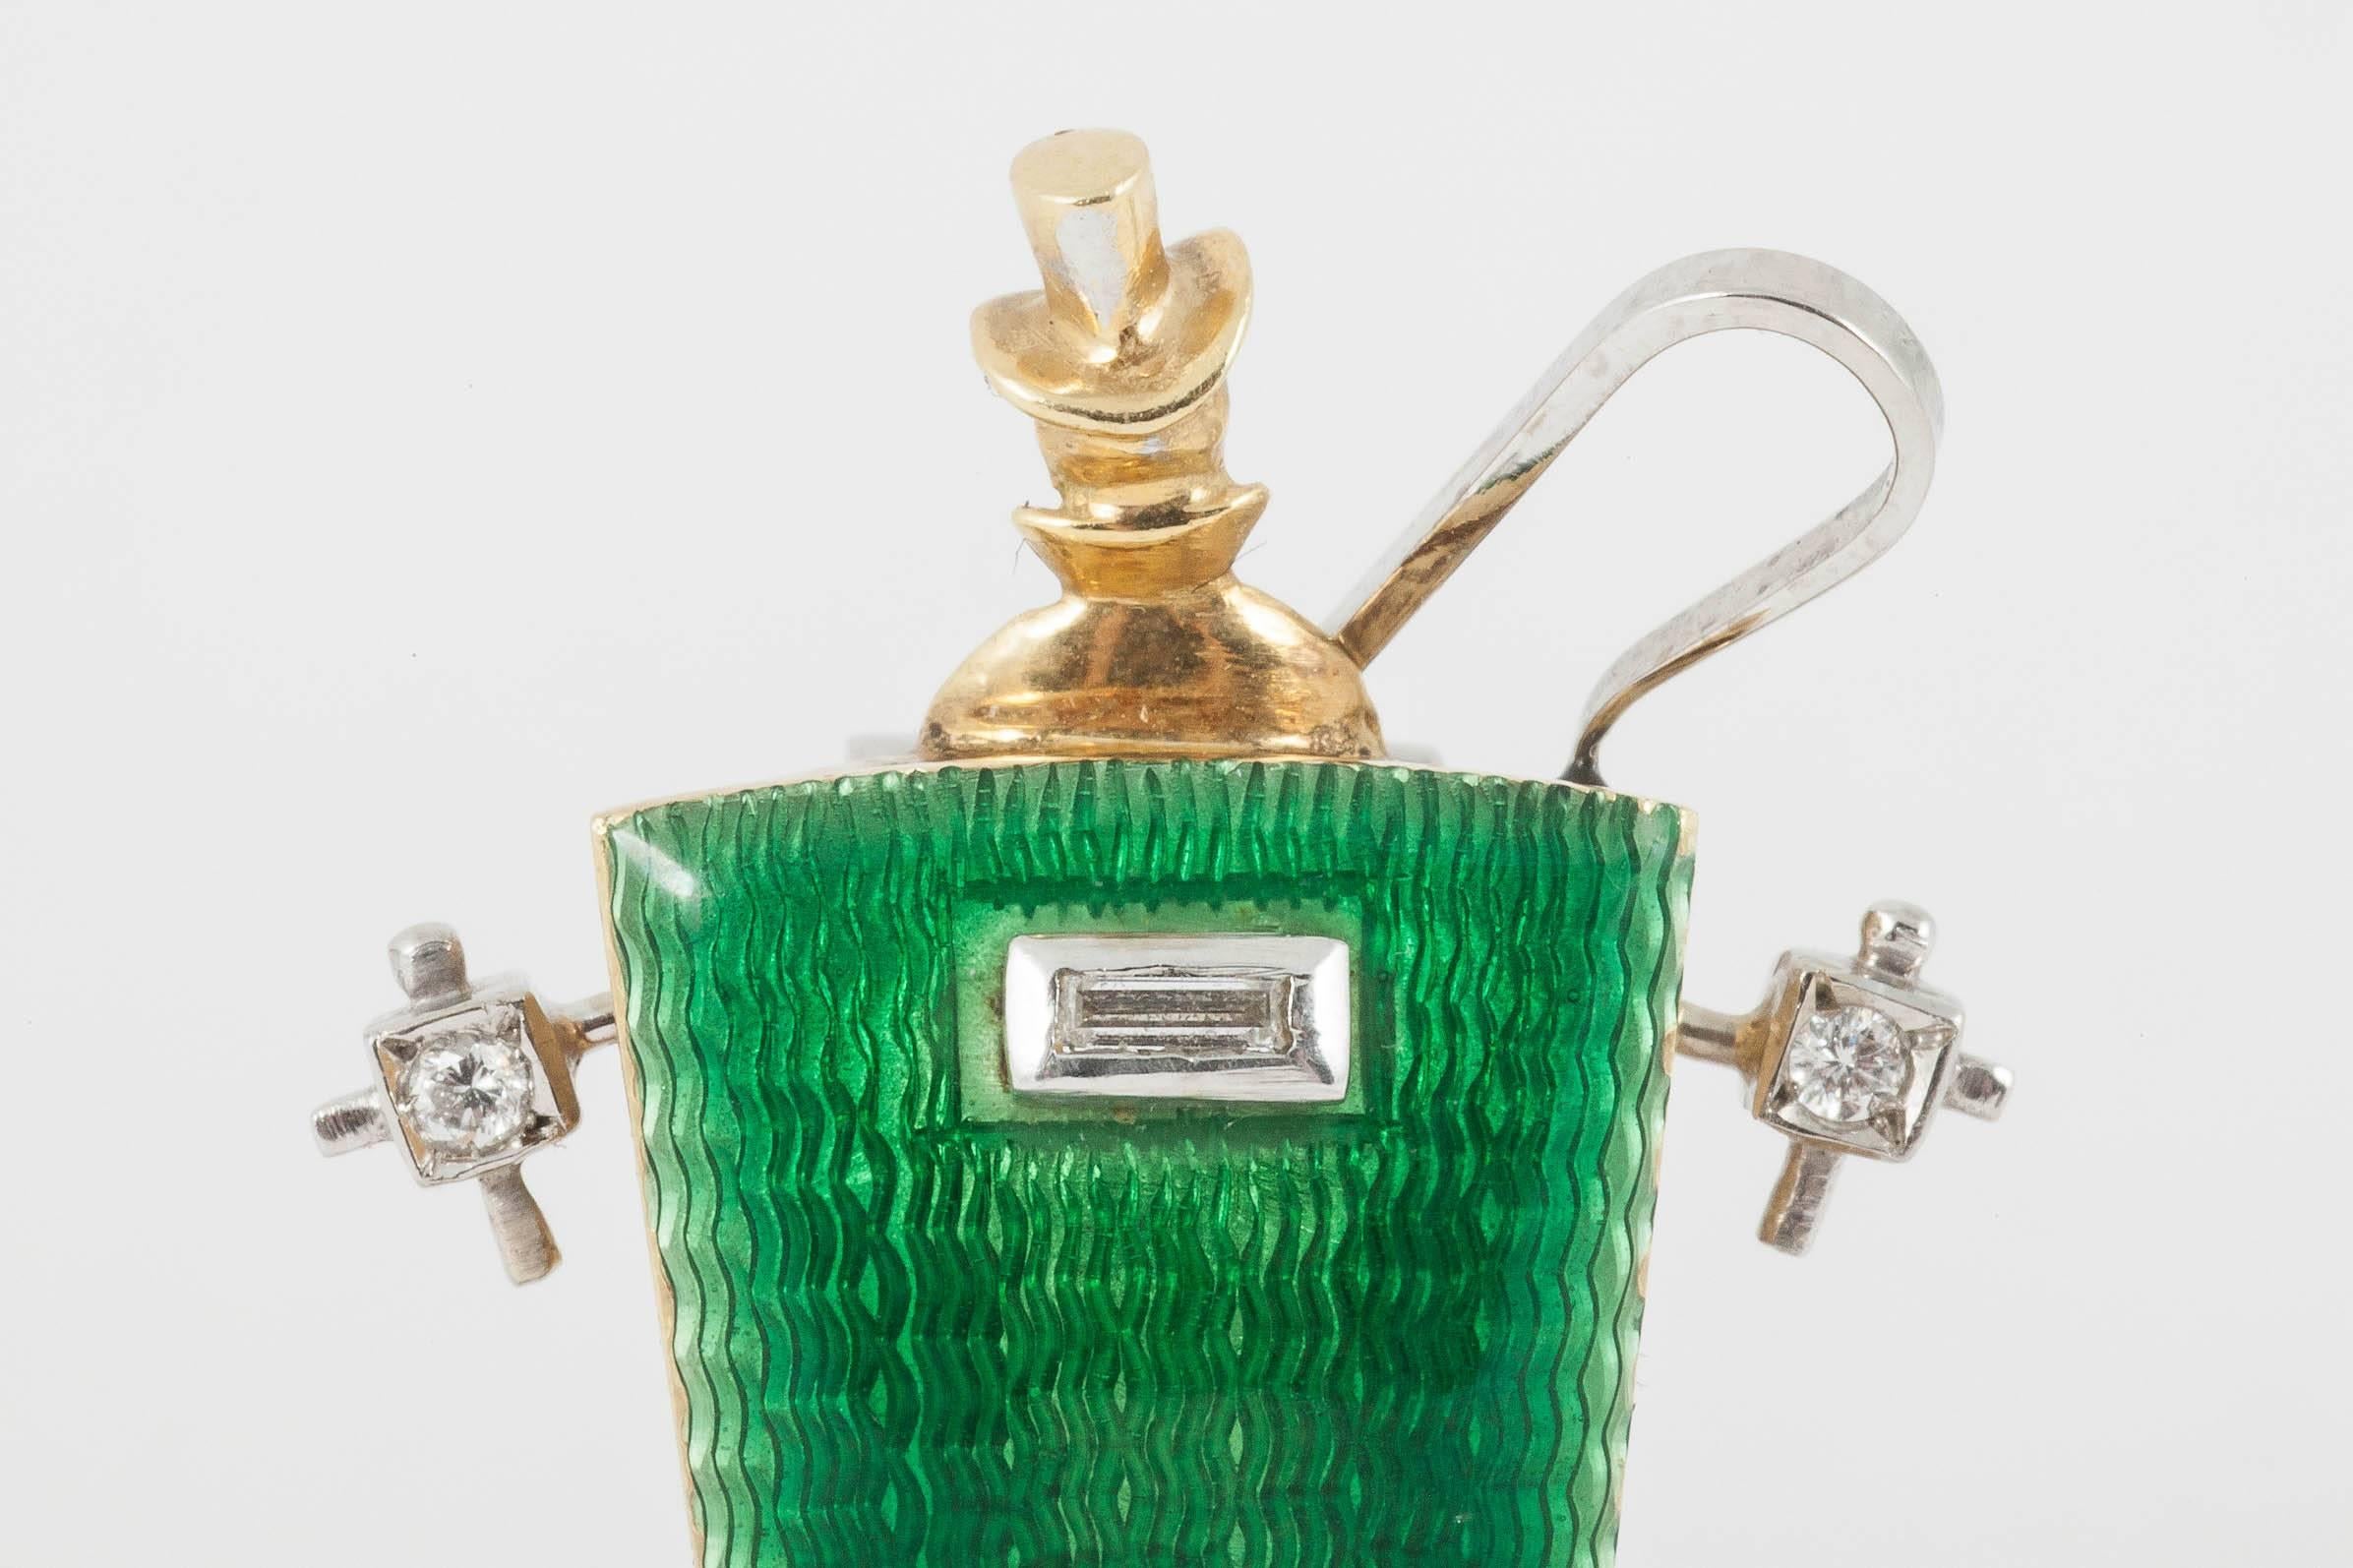 A fine quality, 18kt yellow and white gold coaching carriage clip brooch with guilloche green enamel , and set with a single, baguette cut diamond and four sapphires. French import mark. The driver carrying a whip, the coach lamps set with a single